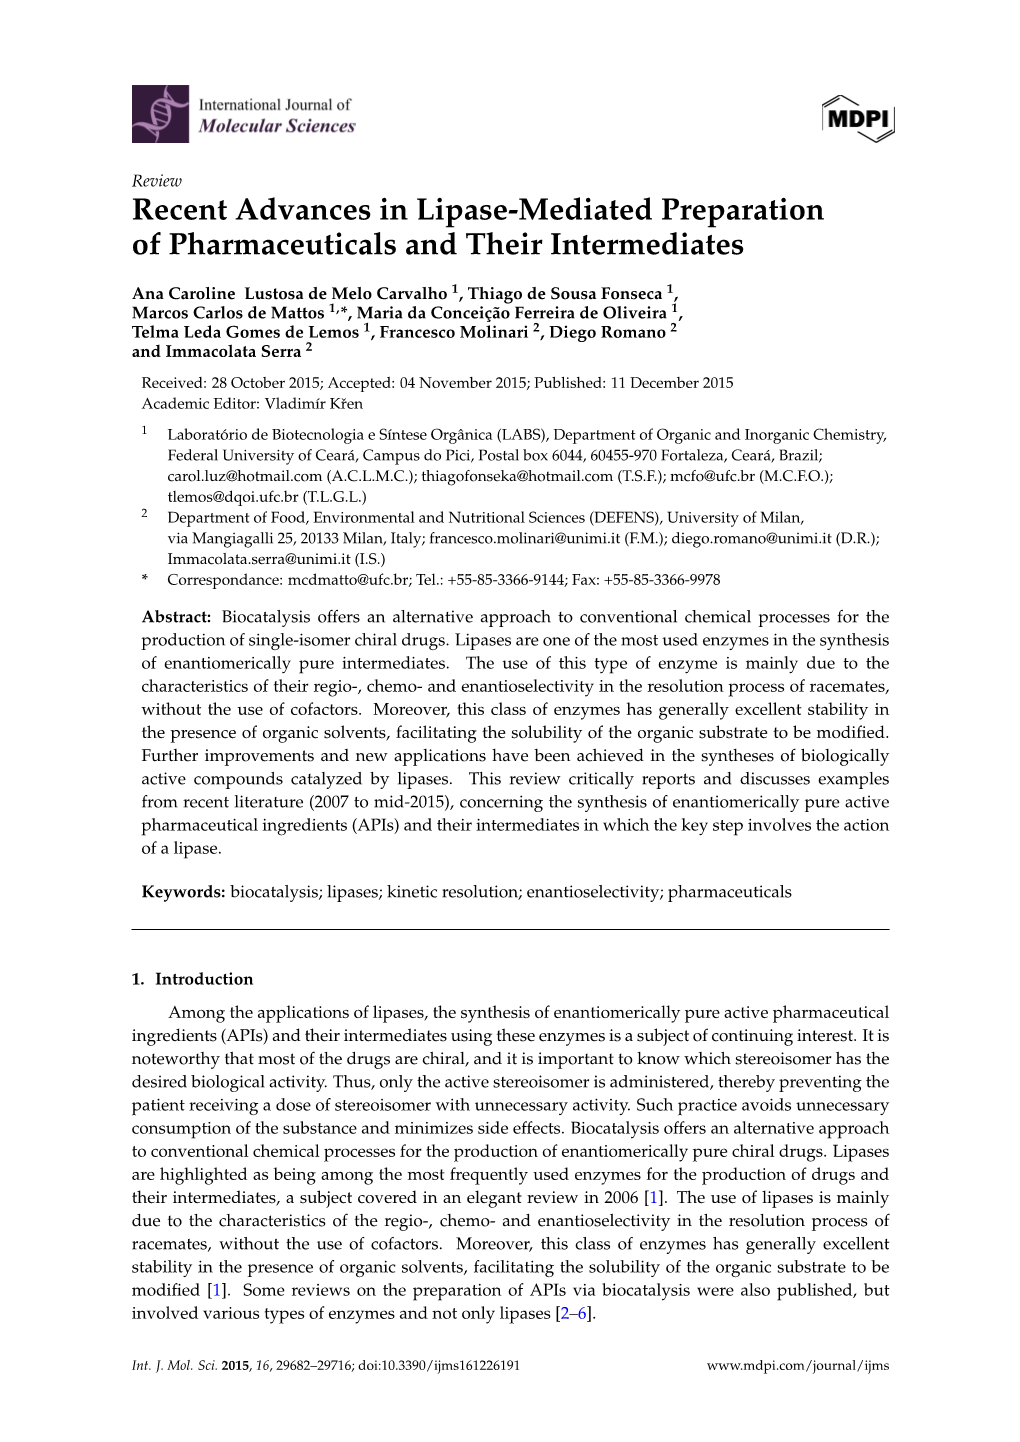 Recent Advances in Lipase-Mediated Preparation of Pharmaceuticals and Their Intermediates